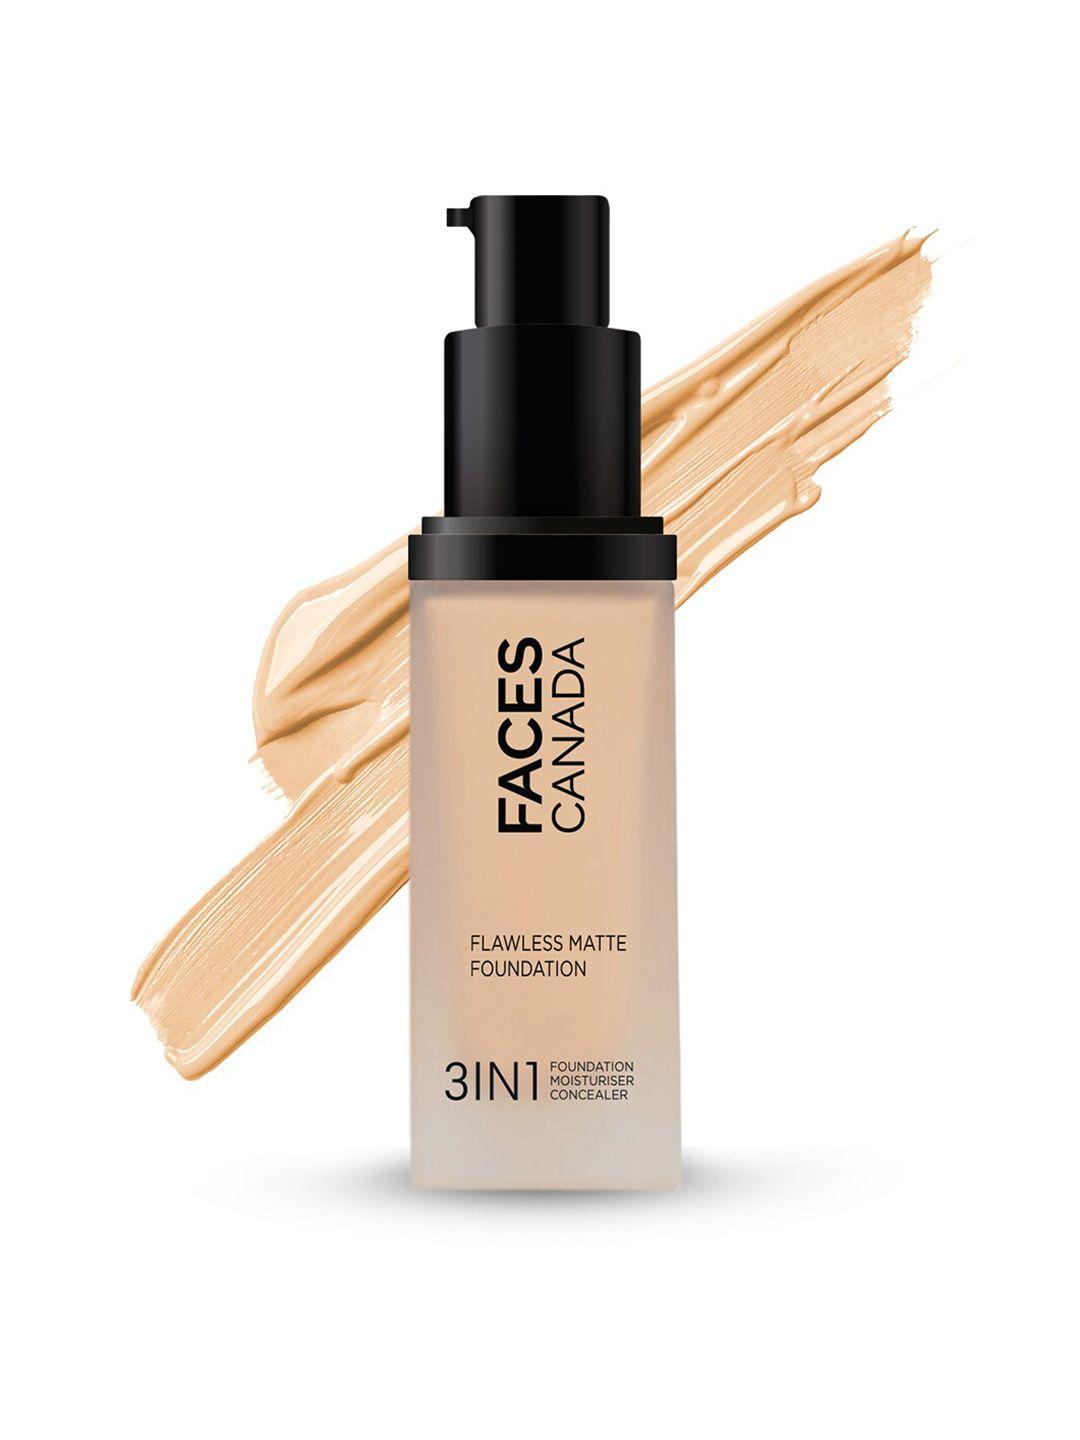 faces-canada-3-in-1-flawless-matte-foundation---30ml-----rich-ivory-013